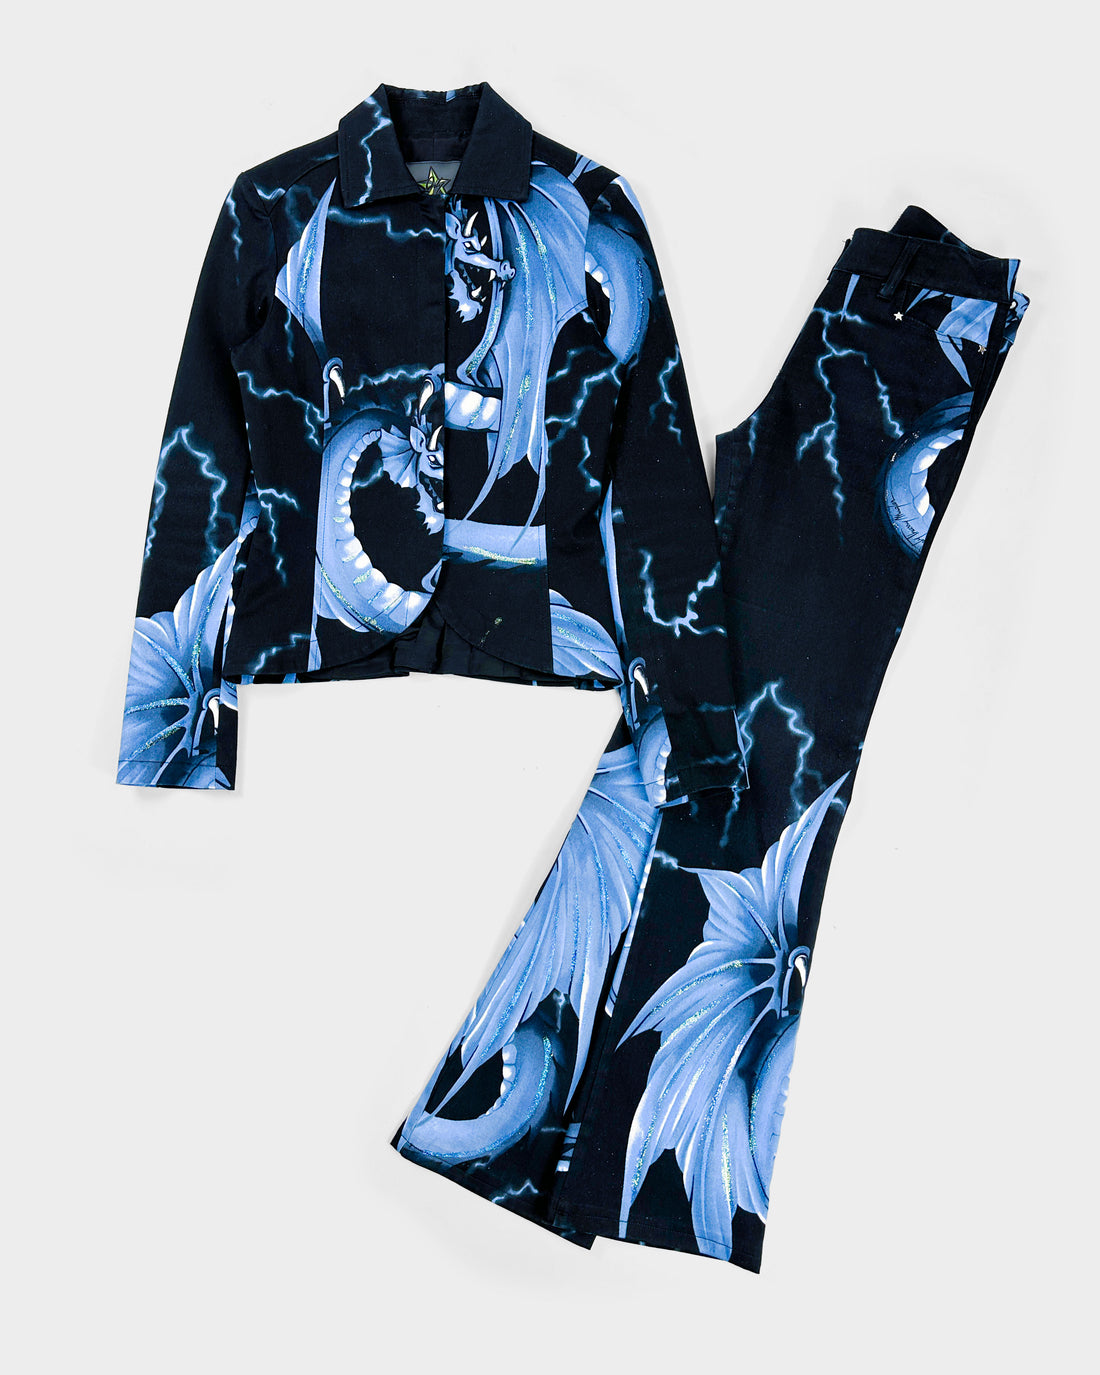 Only By Thierry Mugler 3-Pieces Blue Dragon Set 2000's